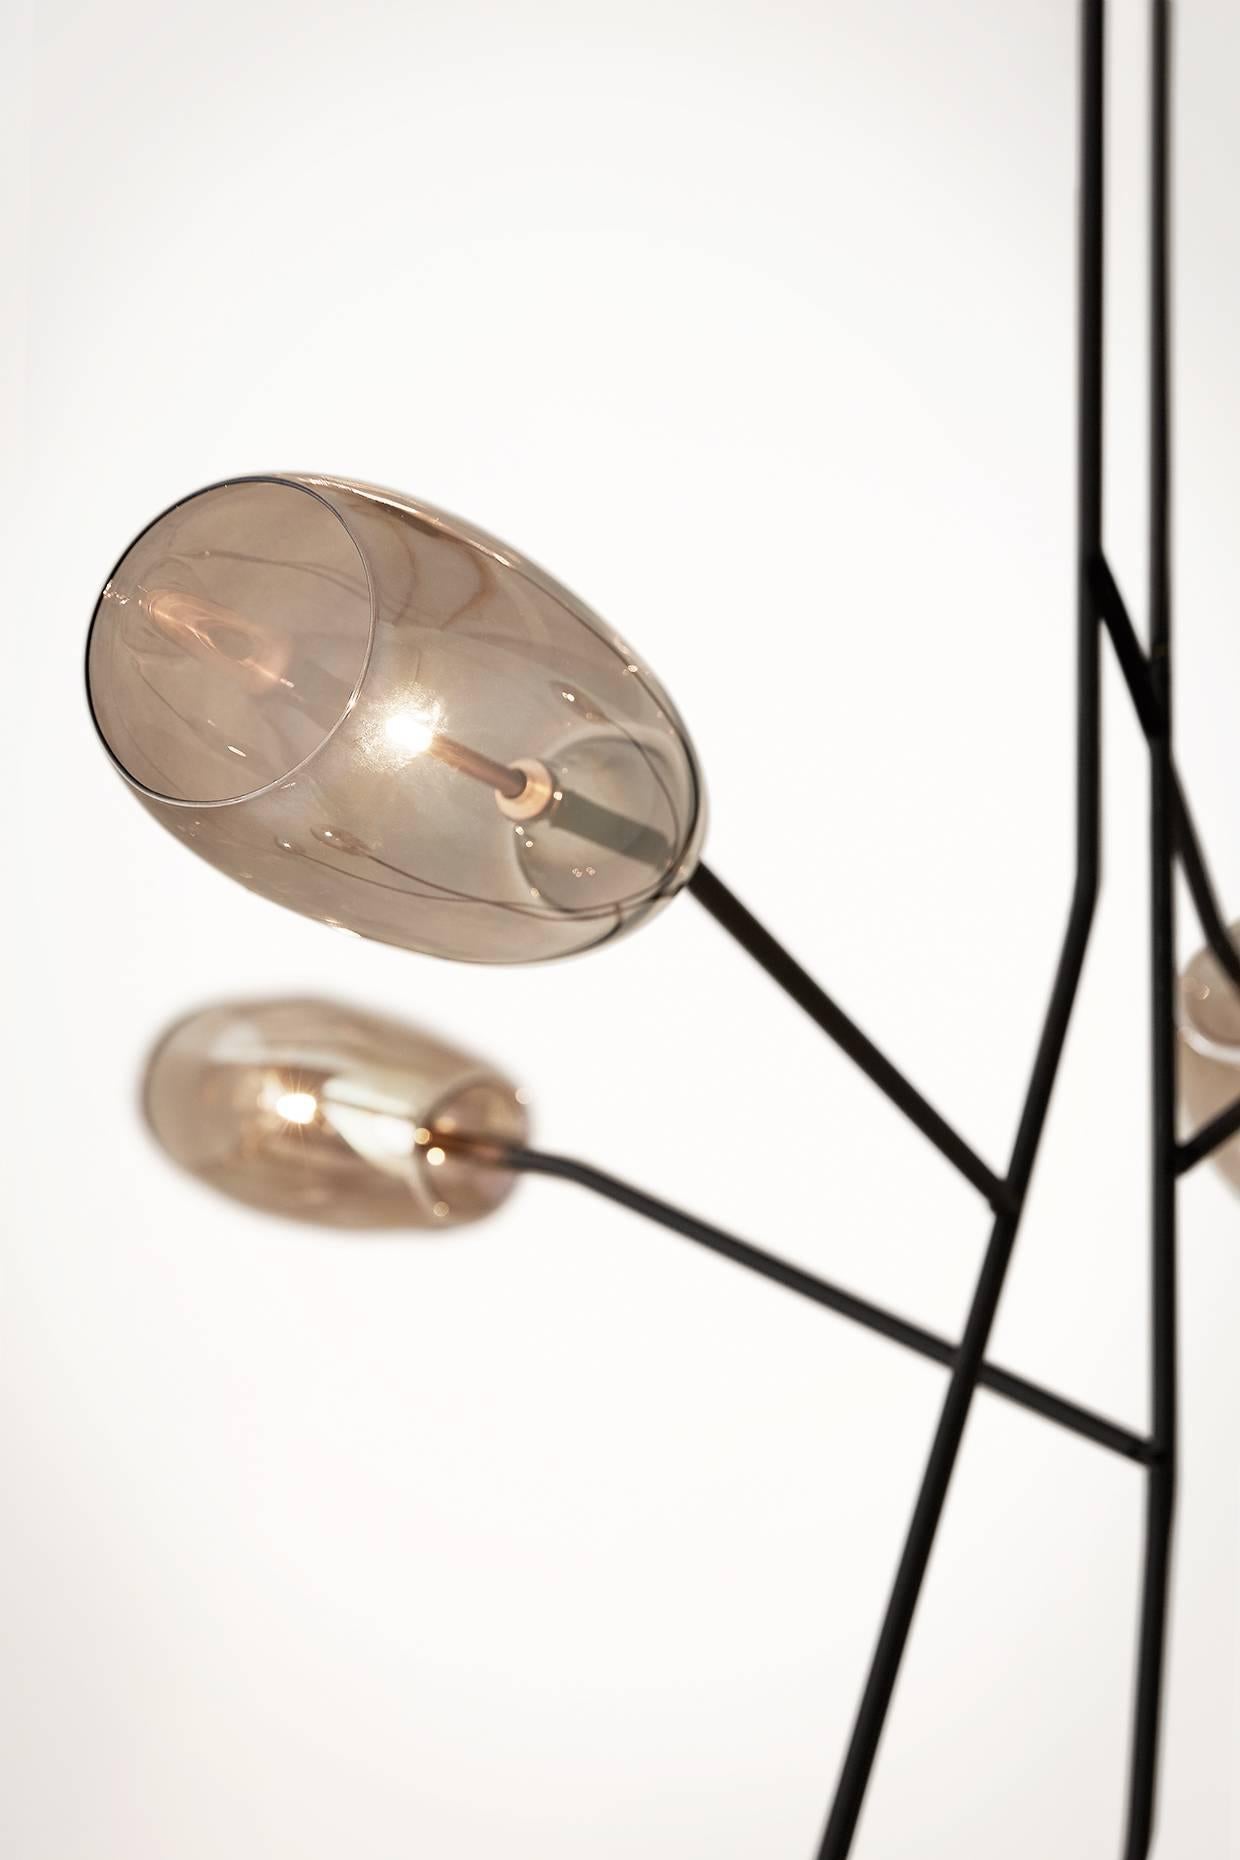 Diantha Terra floor lamp by Massimo Castagna for Gallotti & Radice. 

Diantha Terra Massimo Castagna 
Floor lamp with LED light (6 Watt). Mouth blown and painted glass. Bronzed black metal parts.
 
Dimensions / sizes 
Cm
80 x 90 x 190